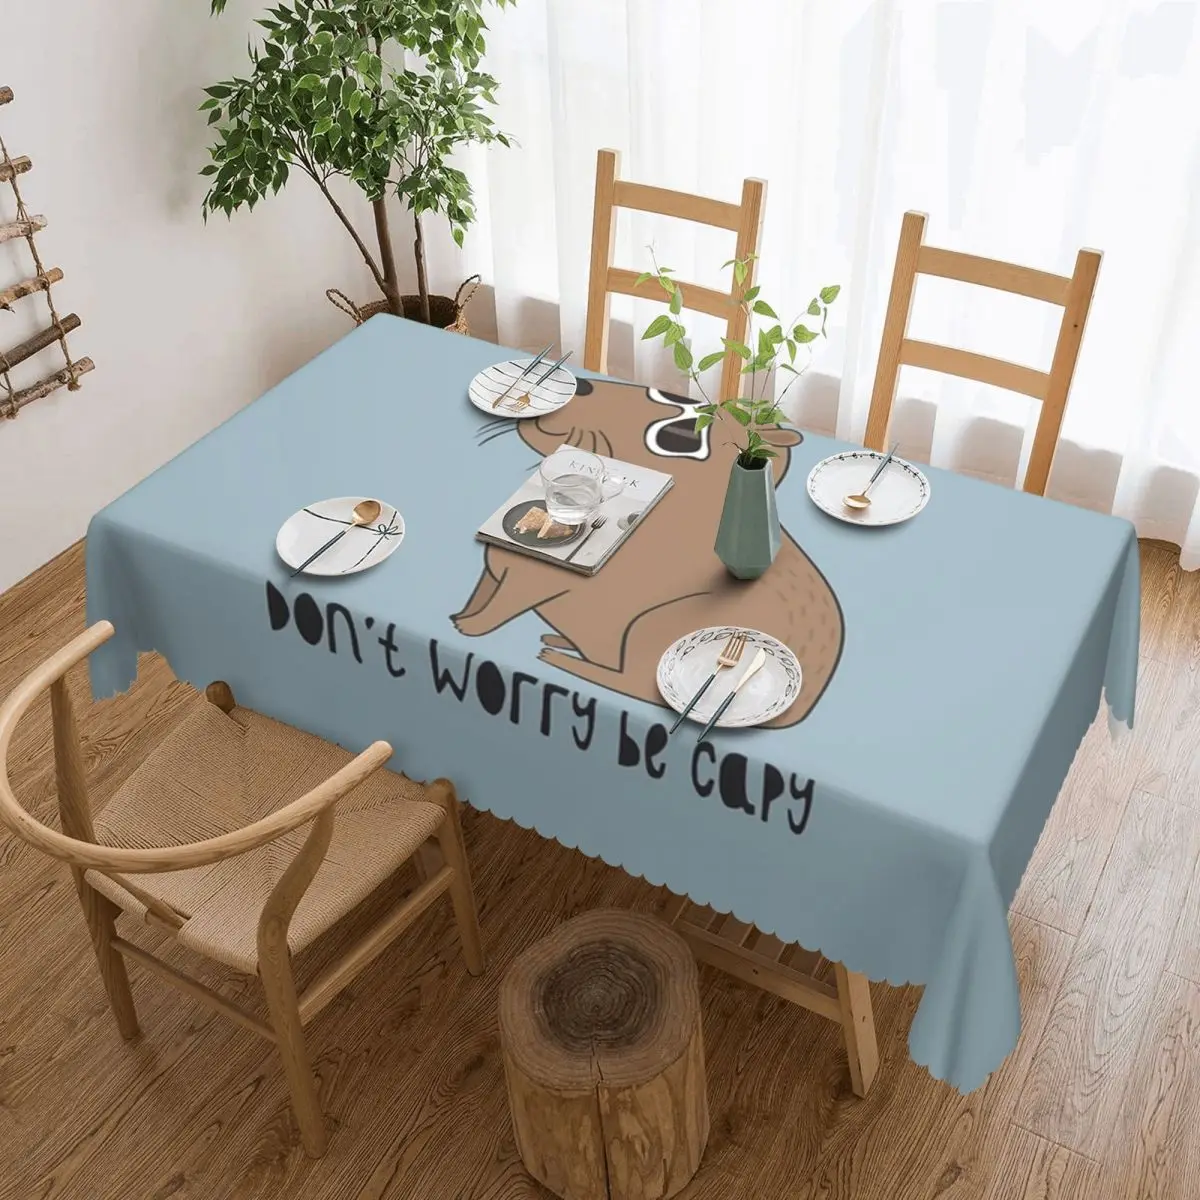 

Don't Worry, Be Capy Awesome Cute Capybara Tablecloth 54x72in soft Protecting Table Festive Decor